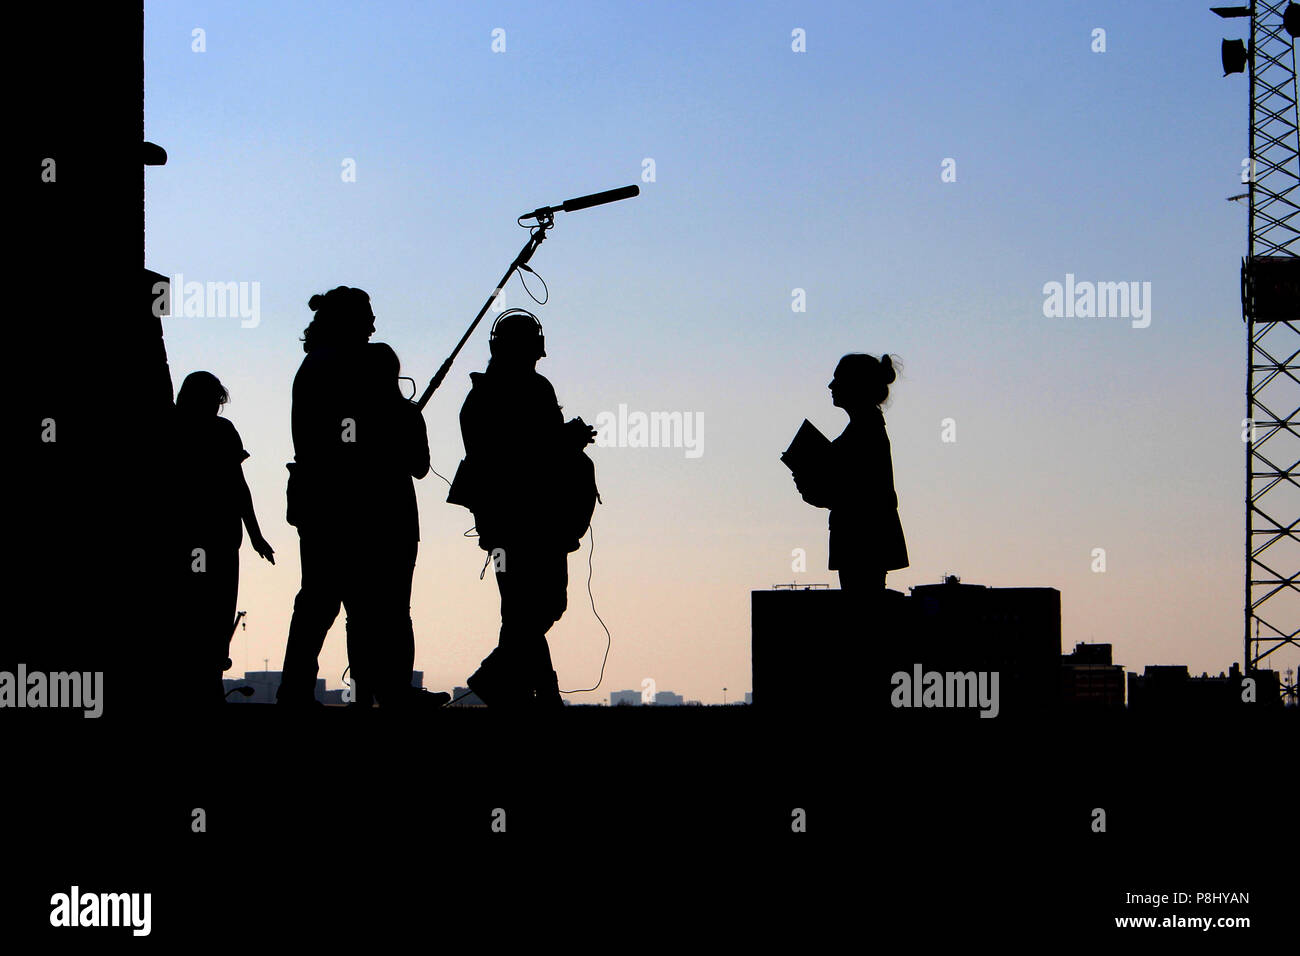 Behind the scenes of a small film crew unit, including audio recordist, boom operator, producers, and talent, silhouetted against the evening sky Stock Photo